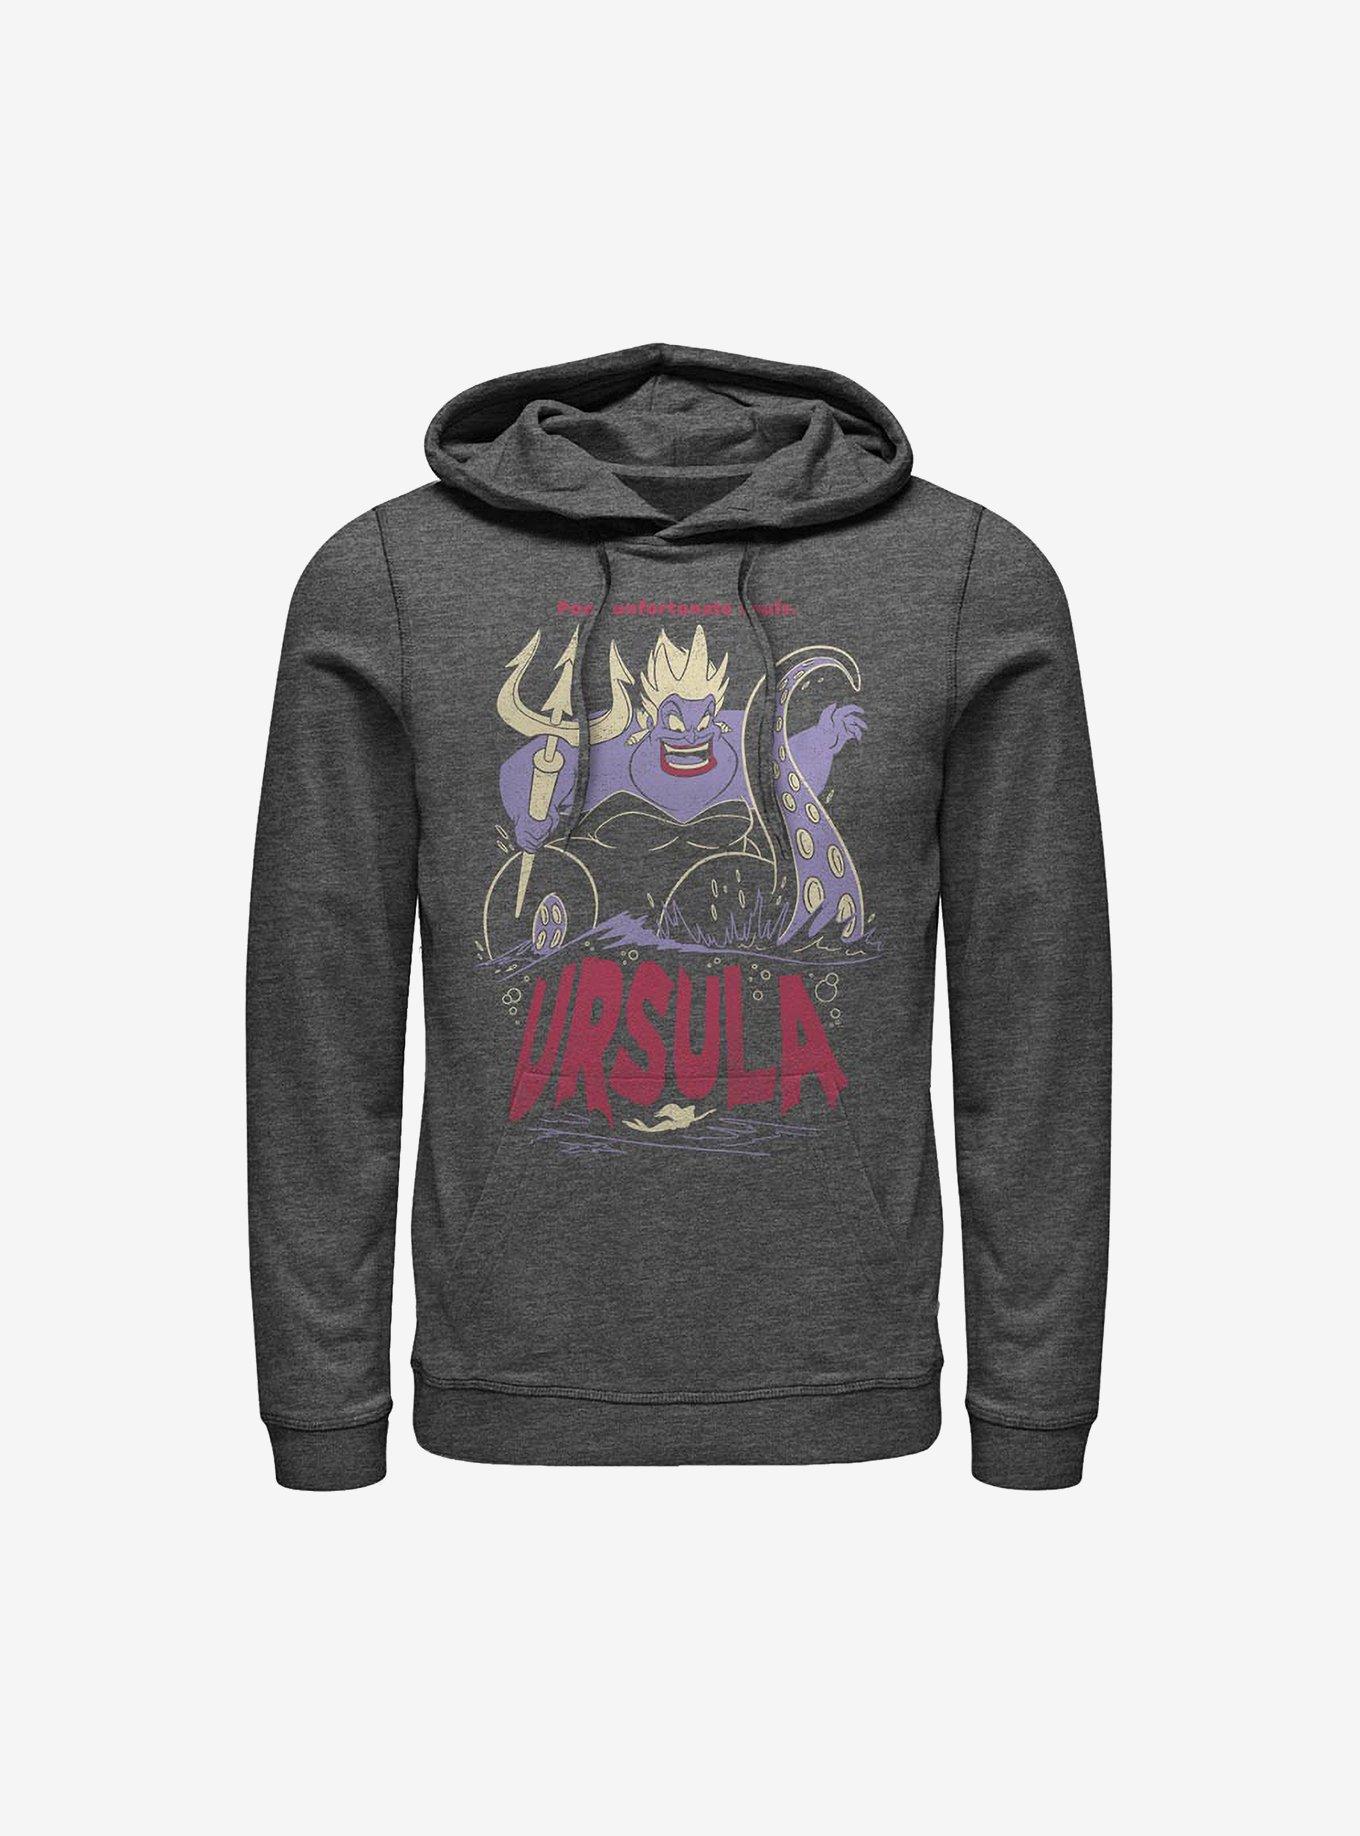 Disney The Little Mermaid Ursula The Sea Witch Hoodie, CHAR HTR, hi-res